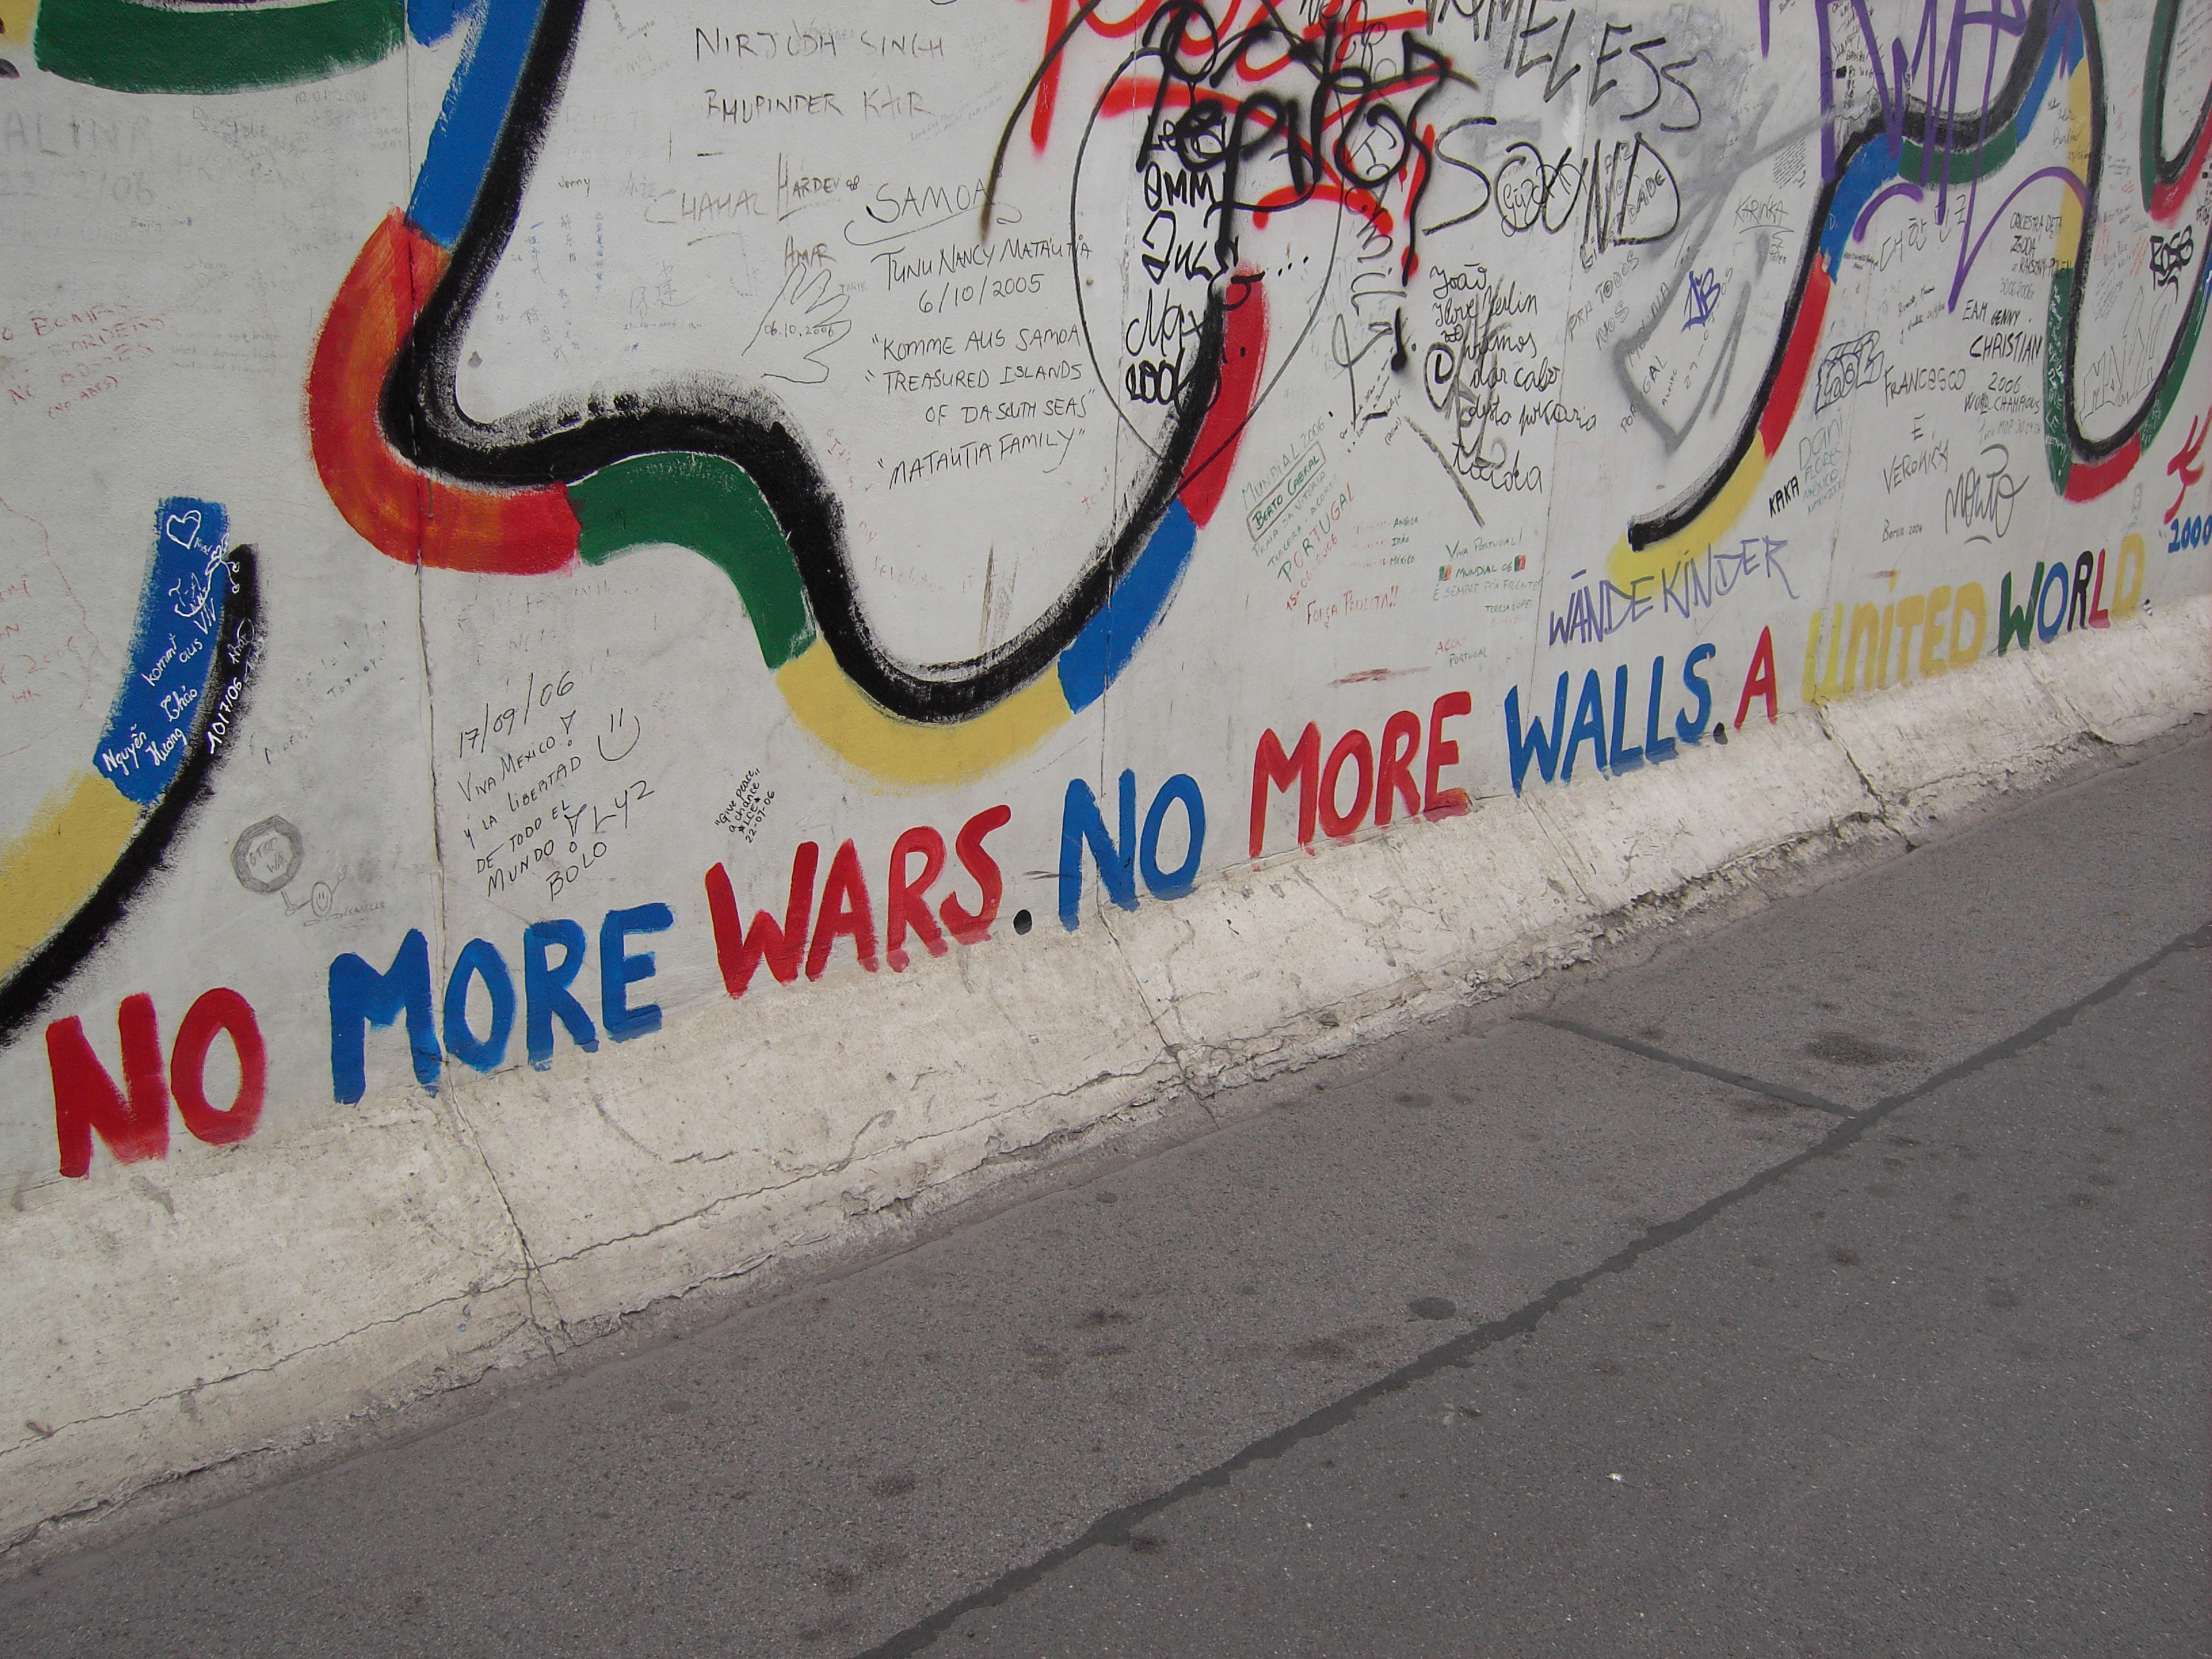 Graffiti on one of the sections of the East Side Gallery in Berlin. Author: Dr Santa. Source: wimikedia/ Public domain